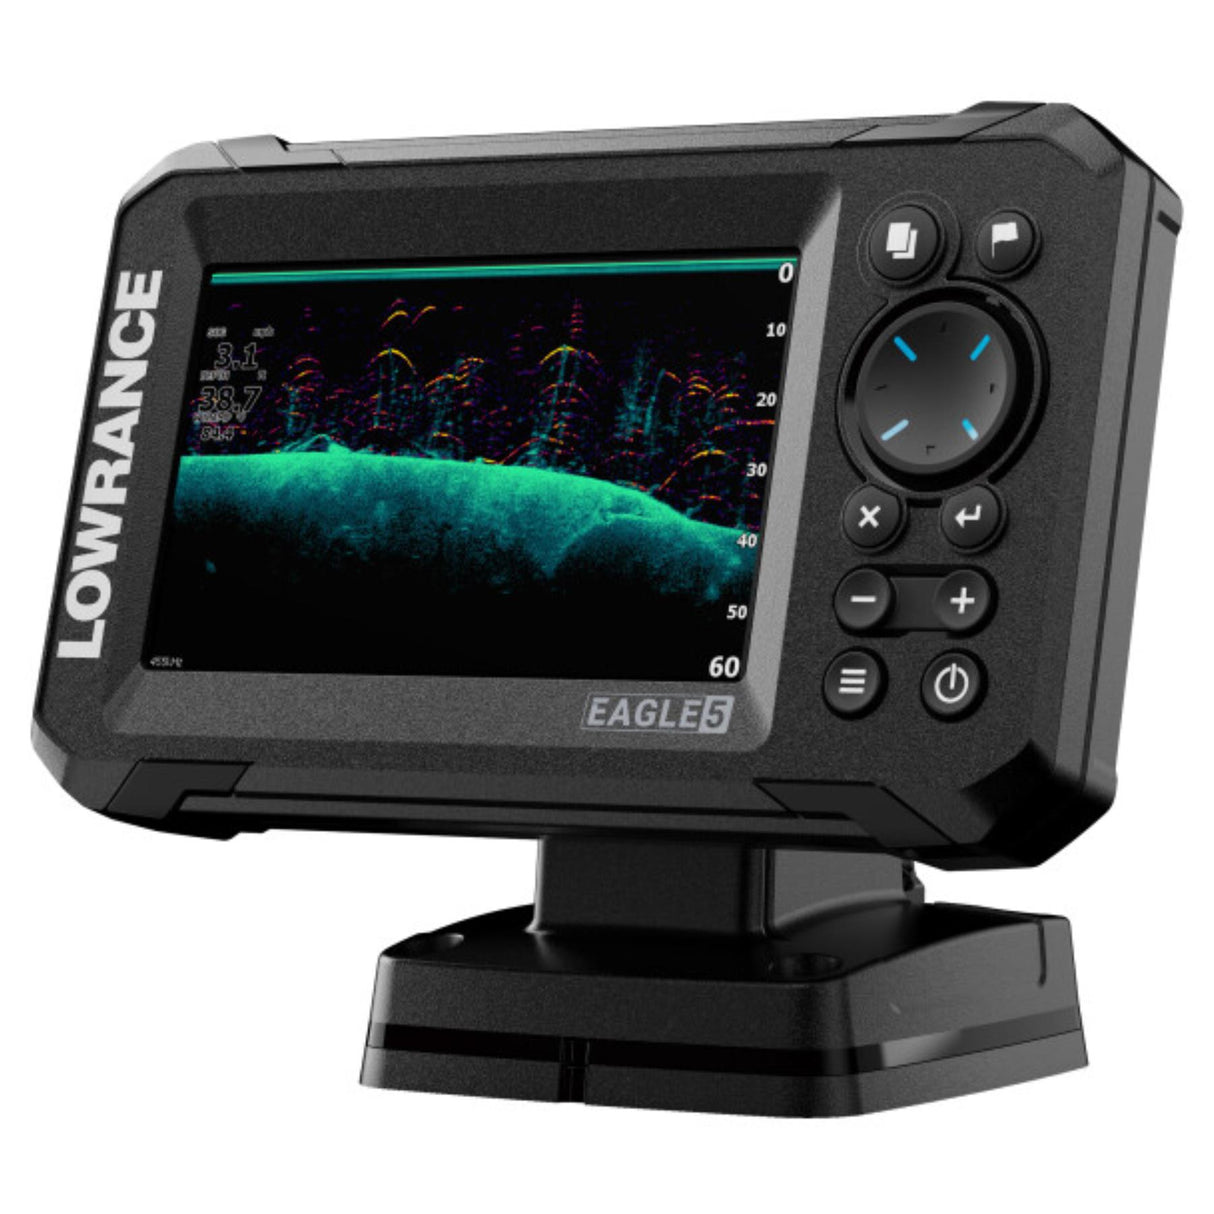 Lowrance Eagle 5 Fishfinder/ Chartplotter with 83/200 HDI Transducer - Pre-loaded Worldwide Basemap